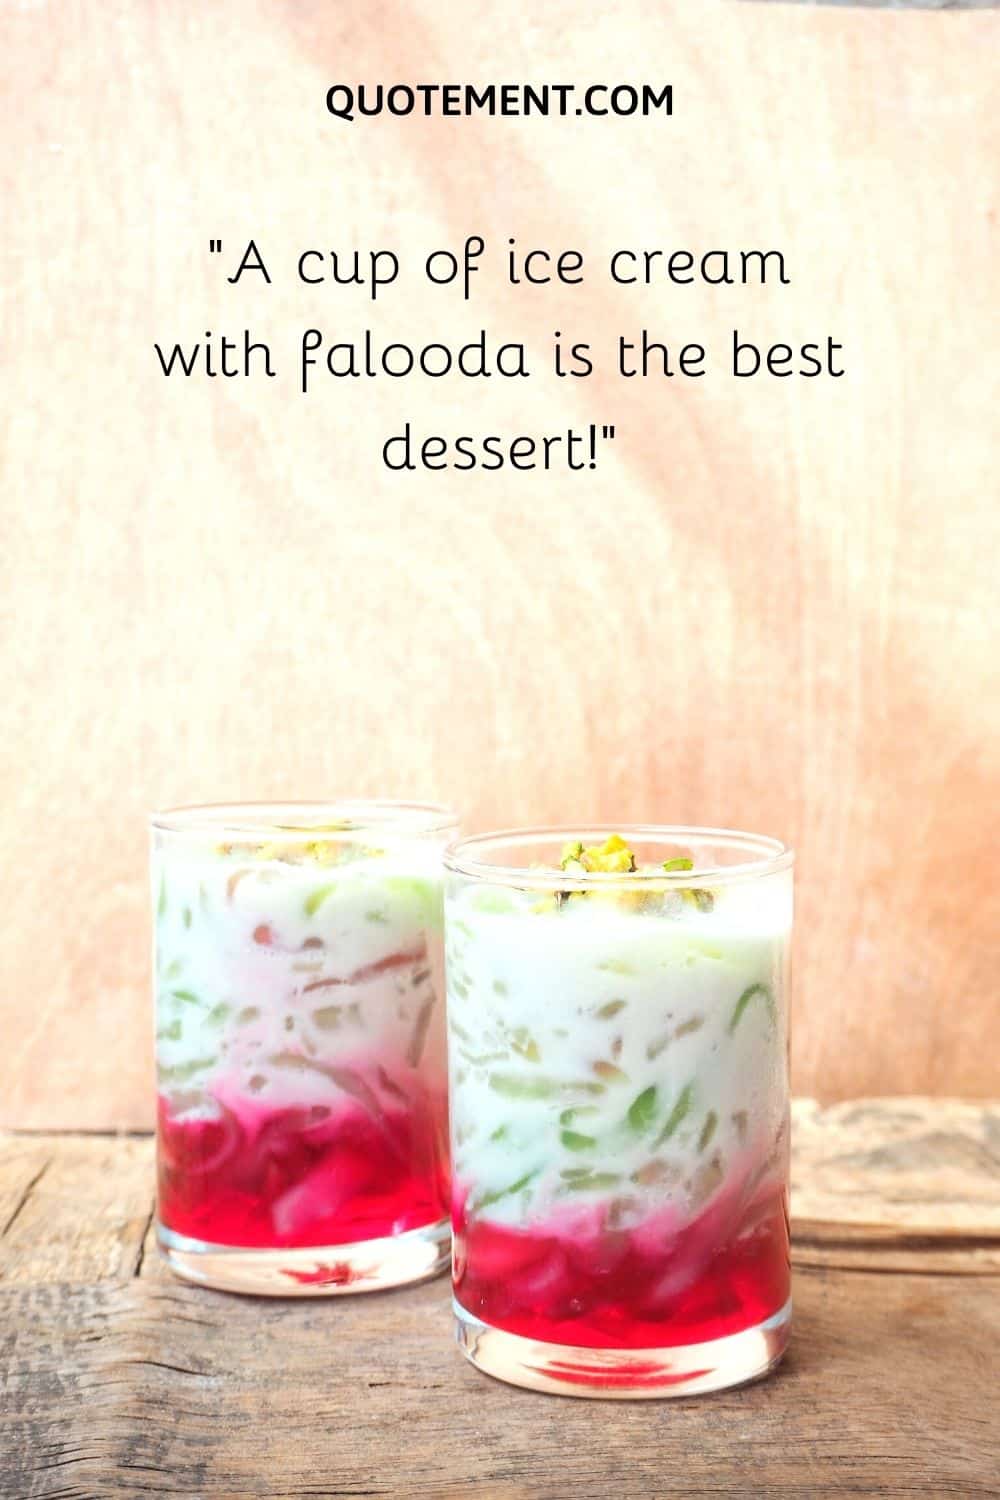 A cup of ice cream with falooda is the best dessert